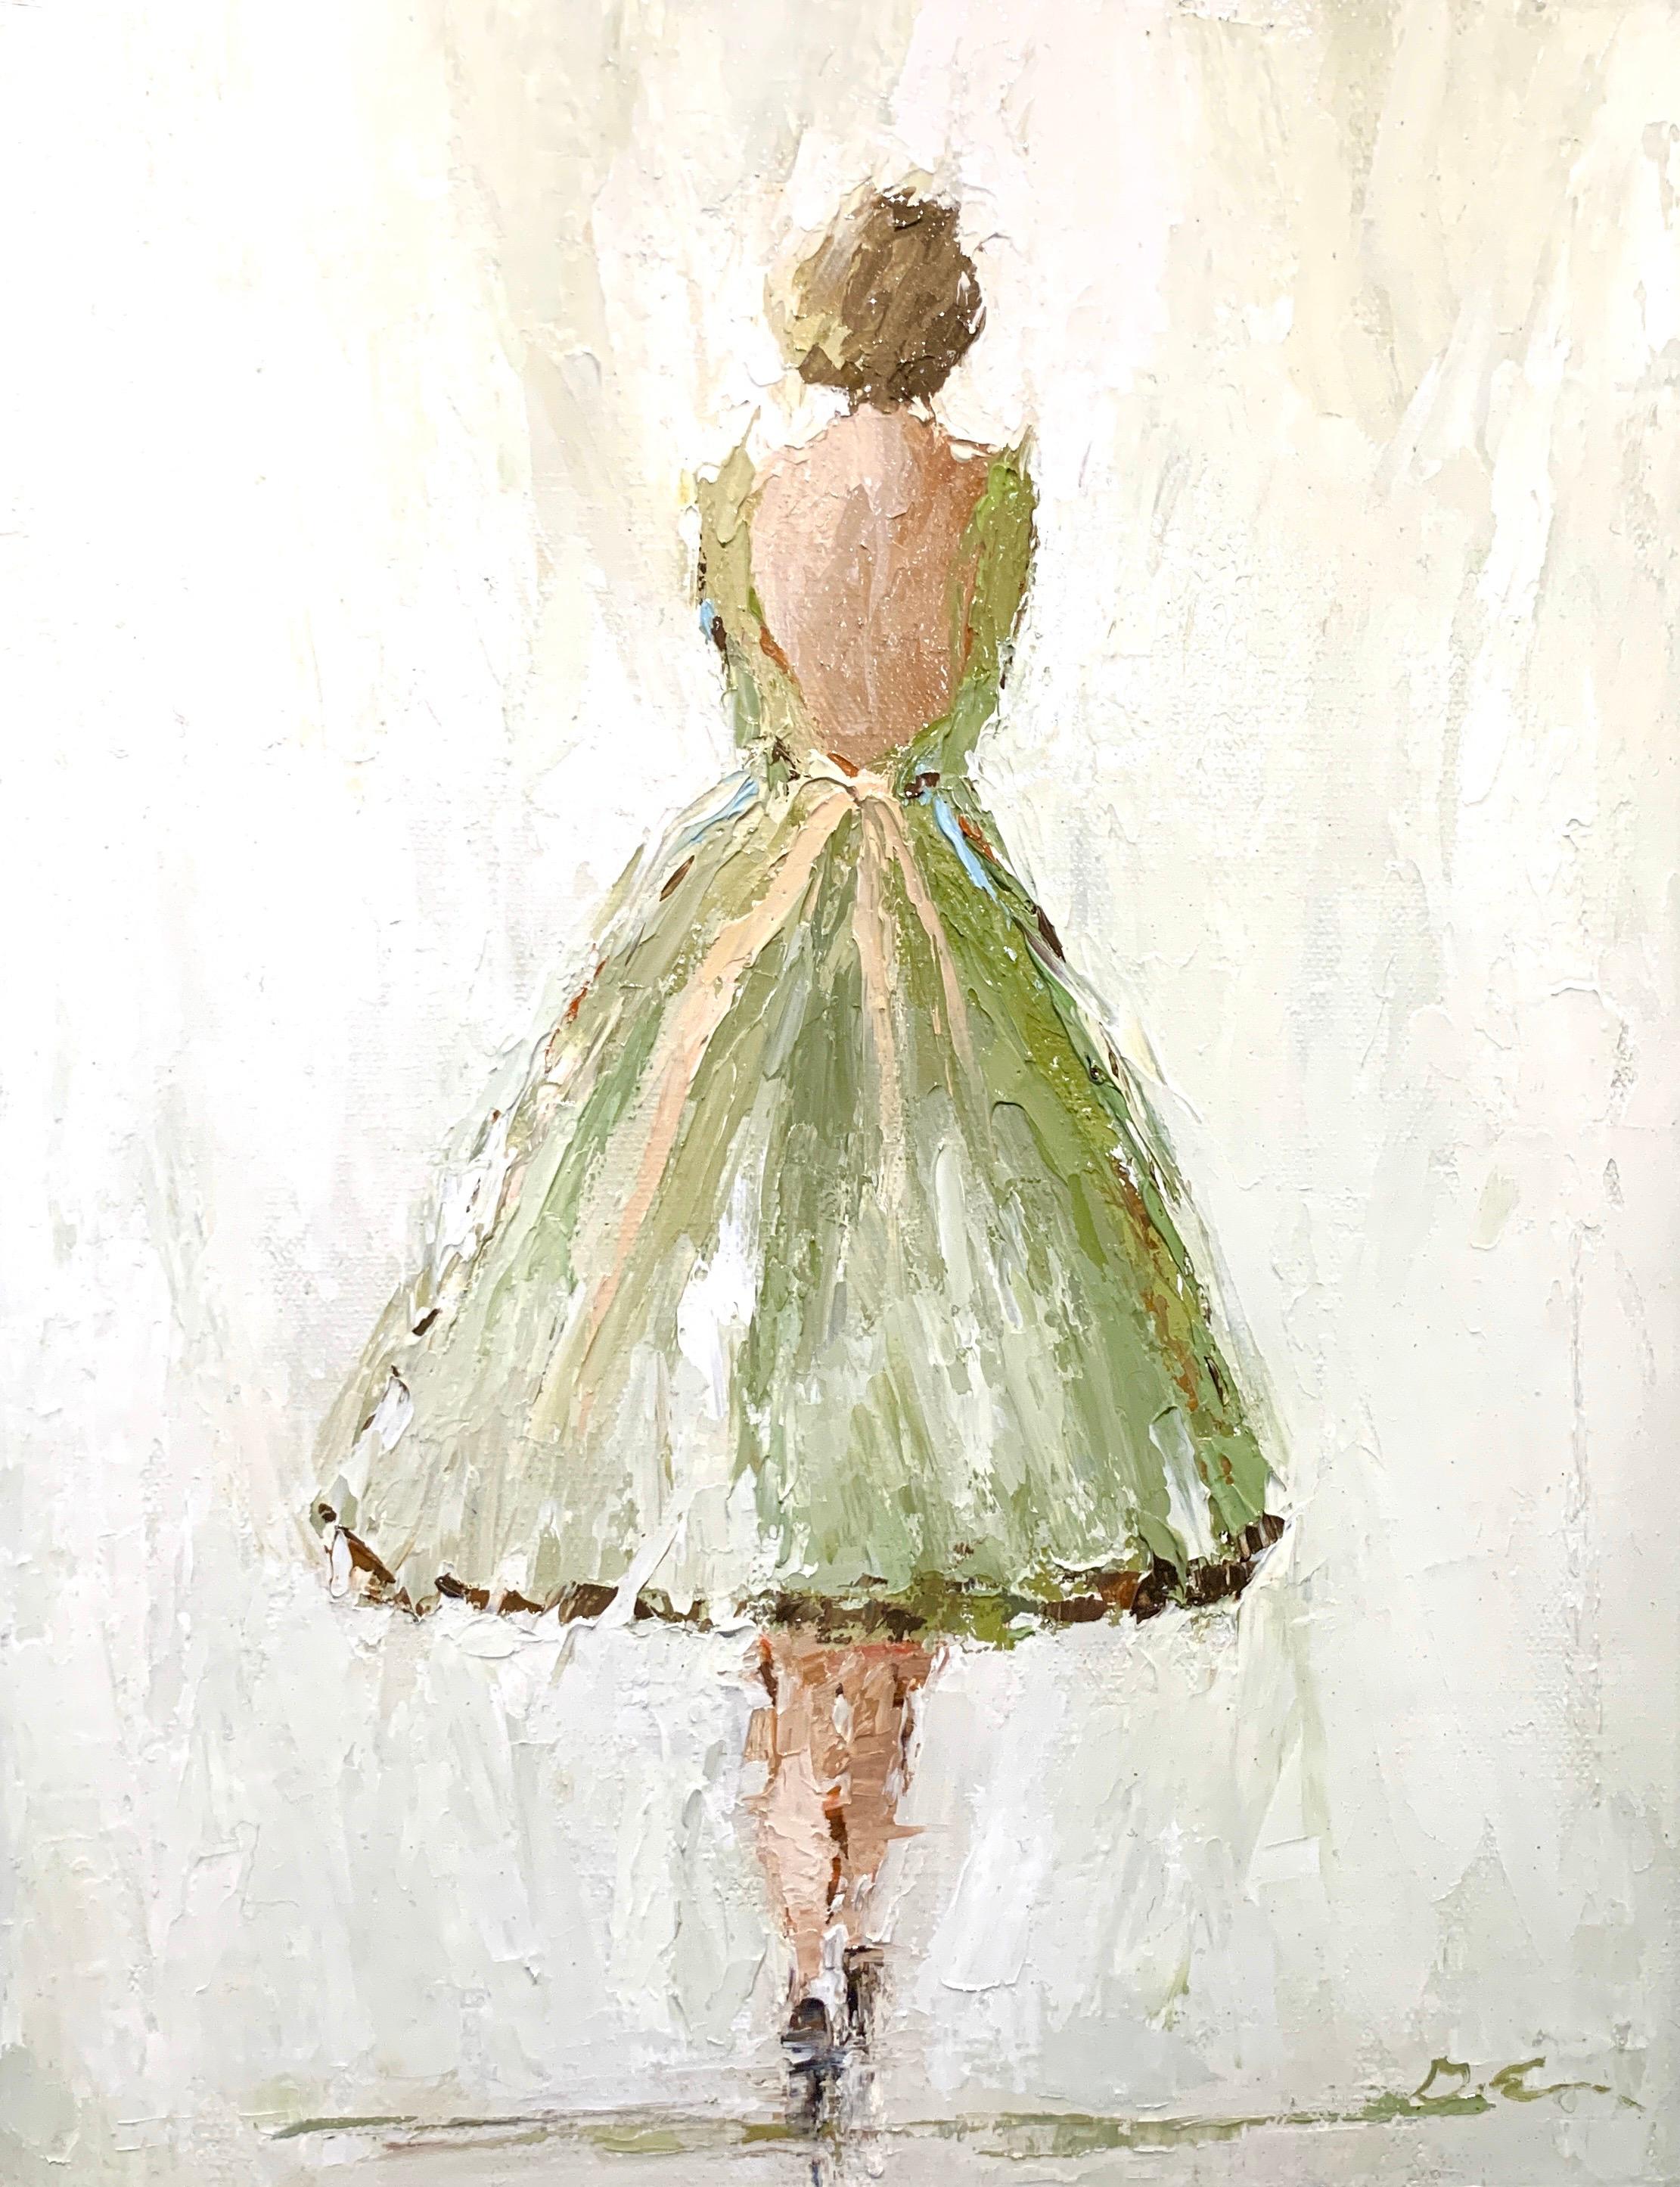 'Betty', is a small framed American Impressionist oil on canvas painting of vertical format created by Geri Eubanks in 2020. The painting features a blond-hair lady depicted from the back, walking away from us. She is wearing a green dress